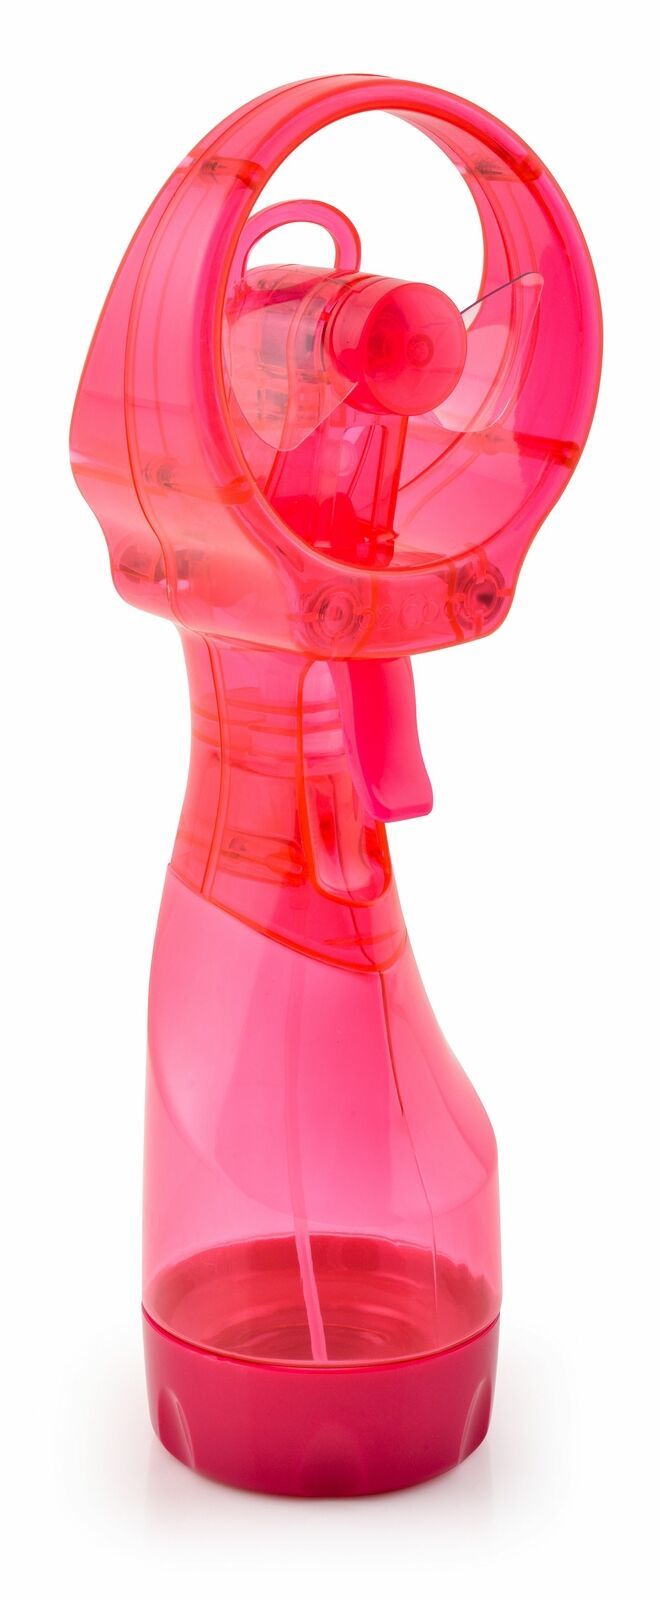 Deluxe Handheld Misting Fan - O2COOL FML0001 - Pink - £4.68 GBP